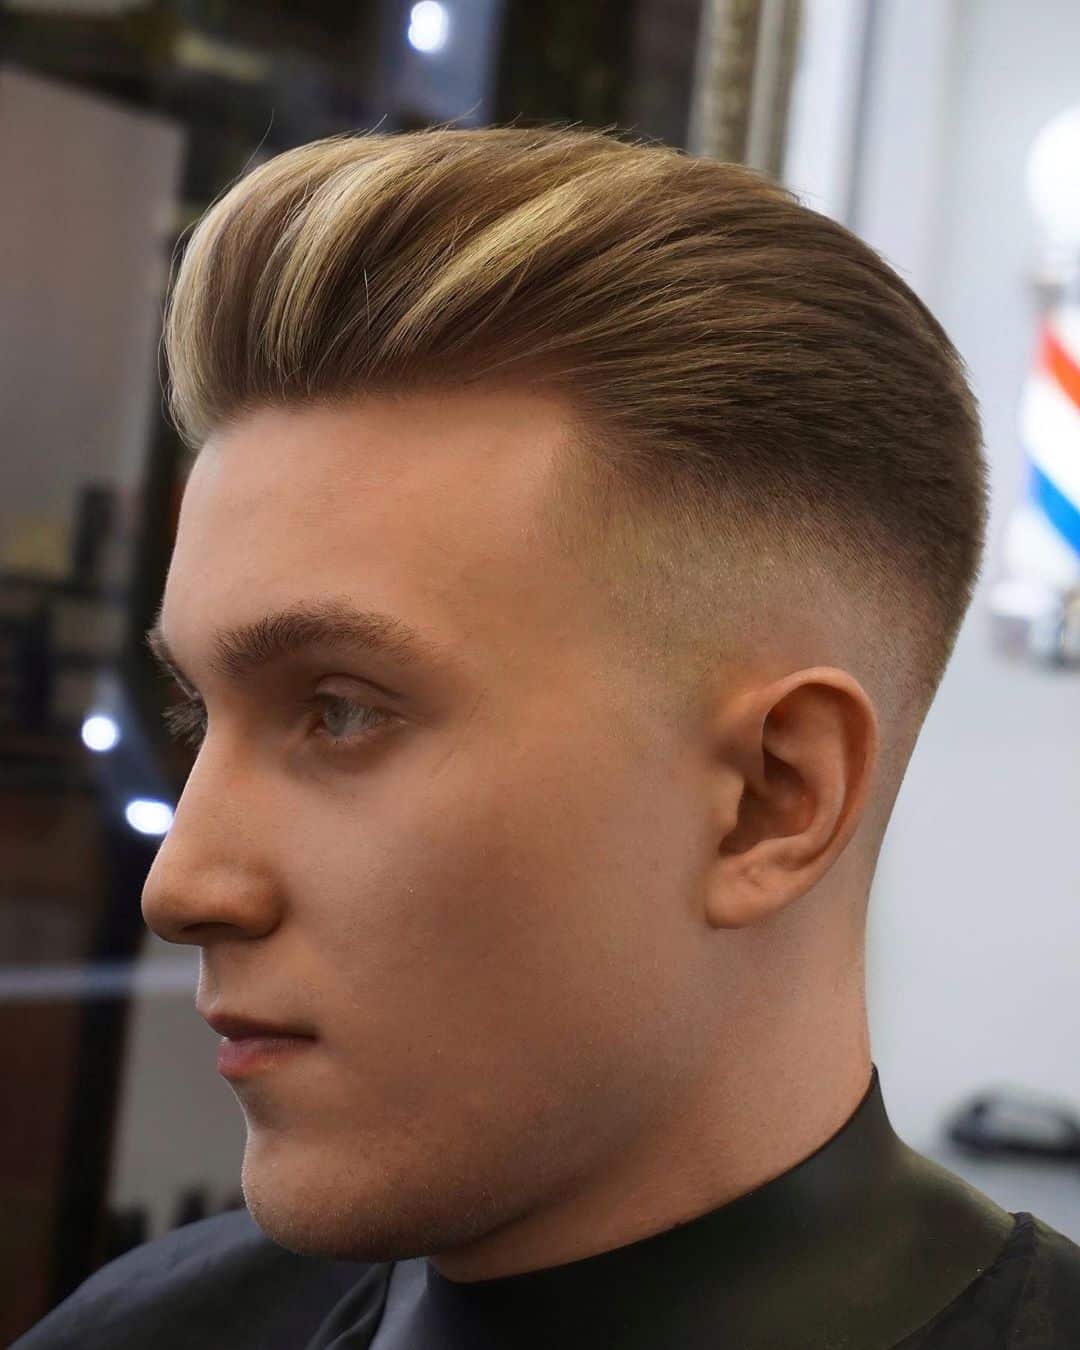 14 Awesome Slicked Back Hairstyle Ideas for Guys